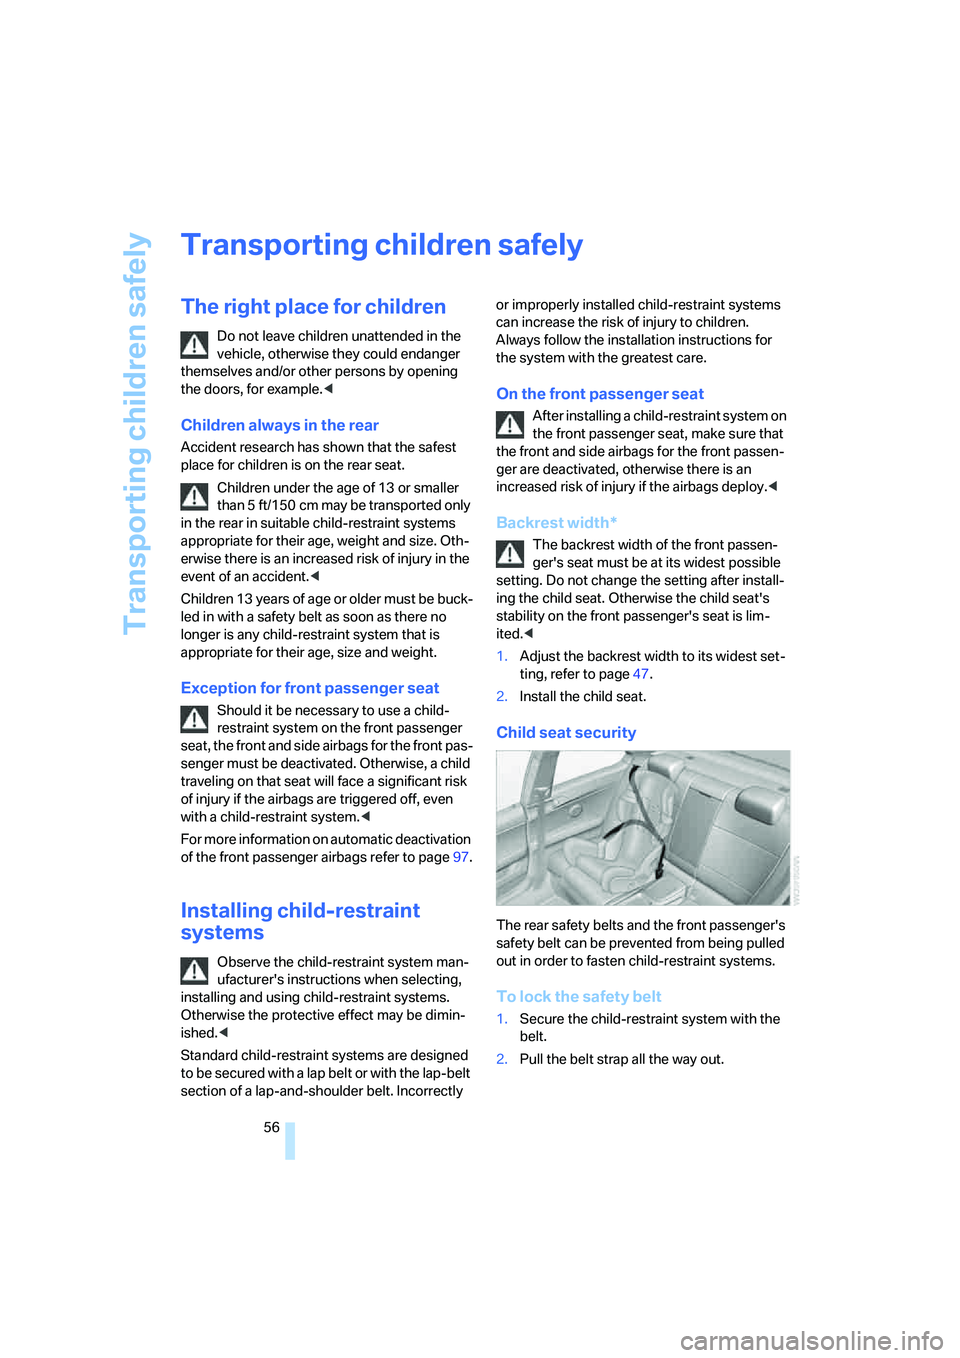 BMW 328XI 2008  Owners Manual Transporting children safely
56
Transporting children safely
The right place for children
Do not leave children unattended in the 
vehicle, otherwise they could endanger 
themselves and/or other perso